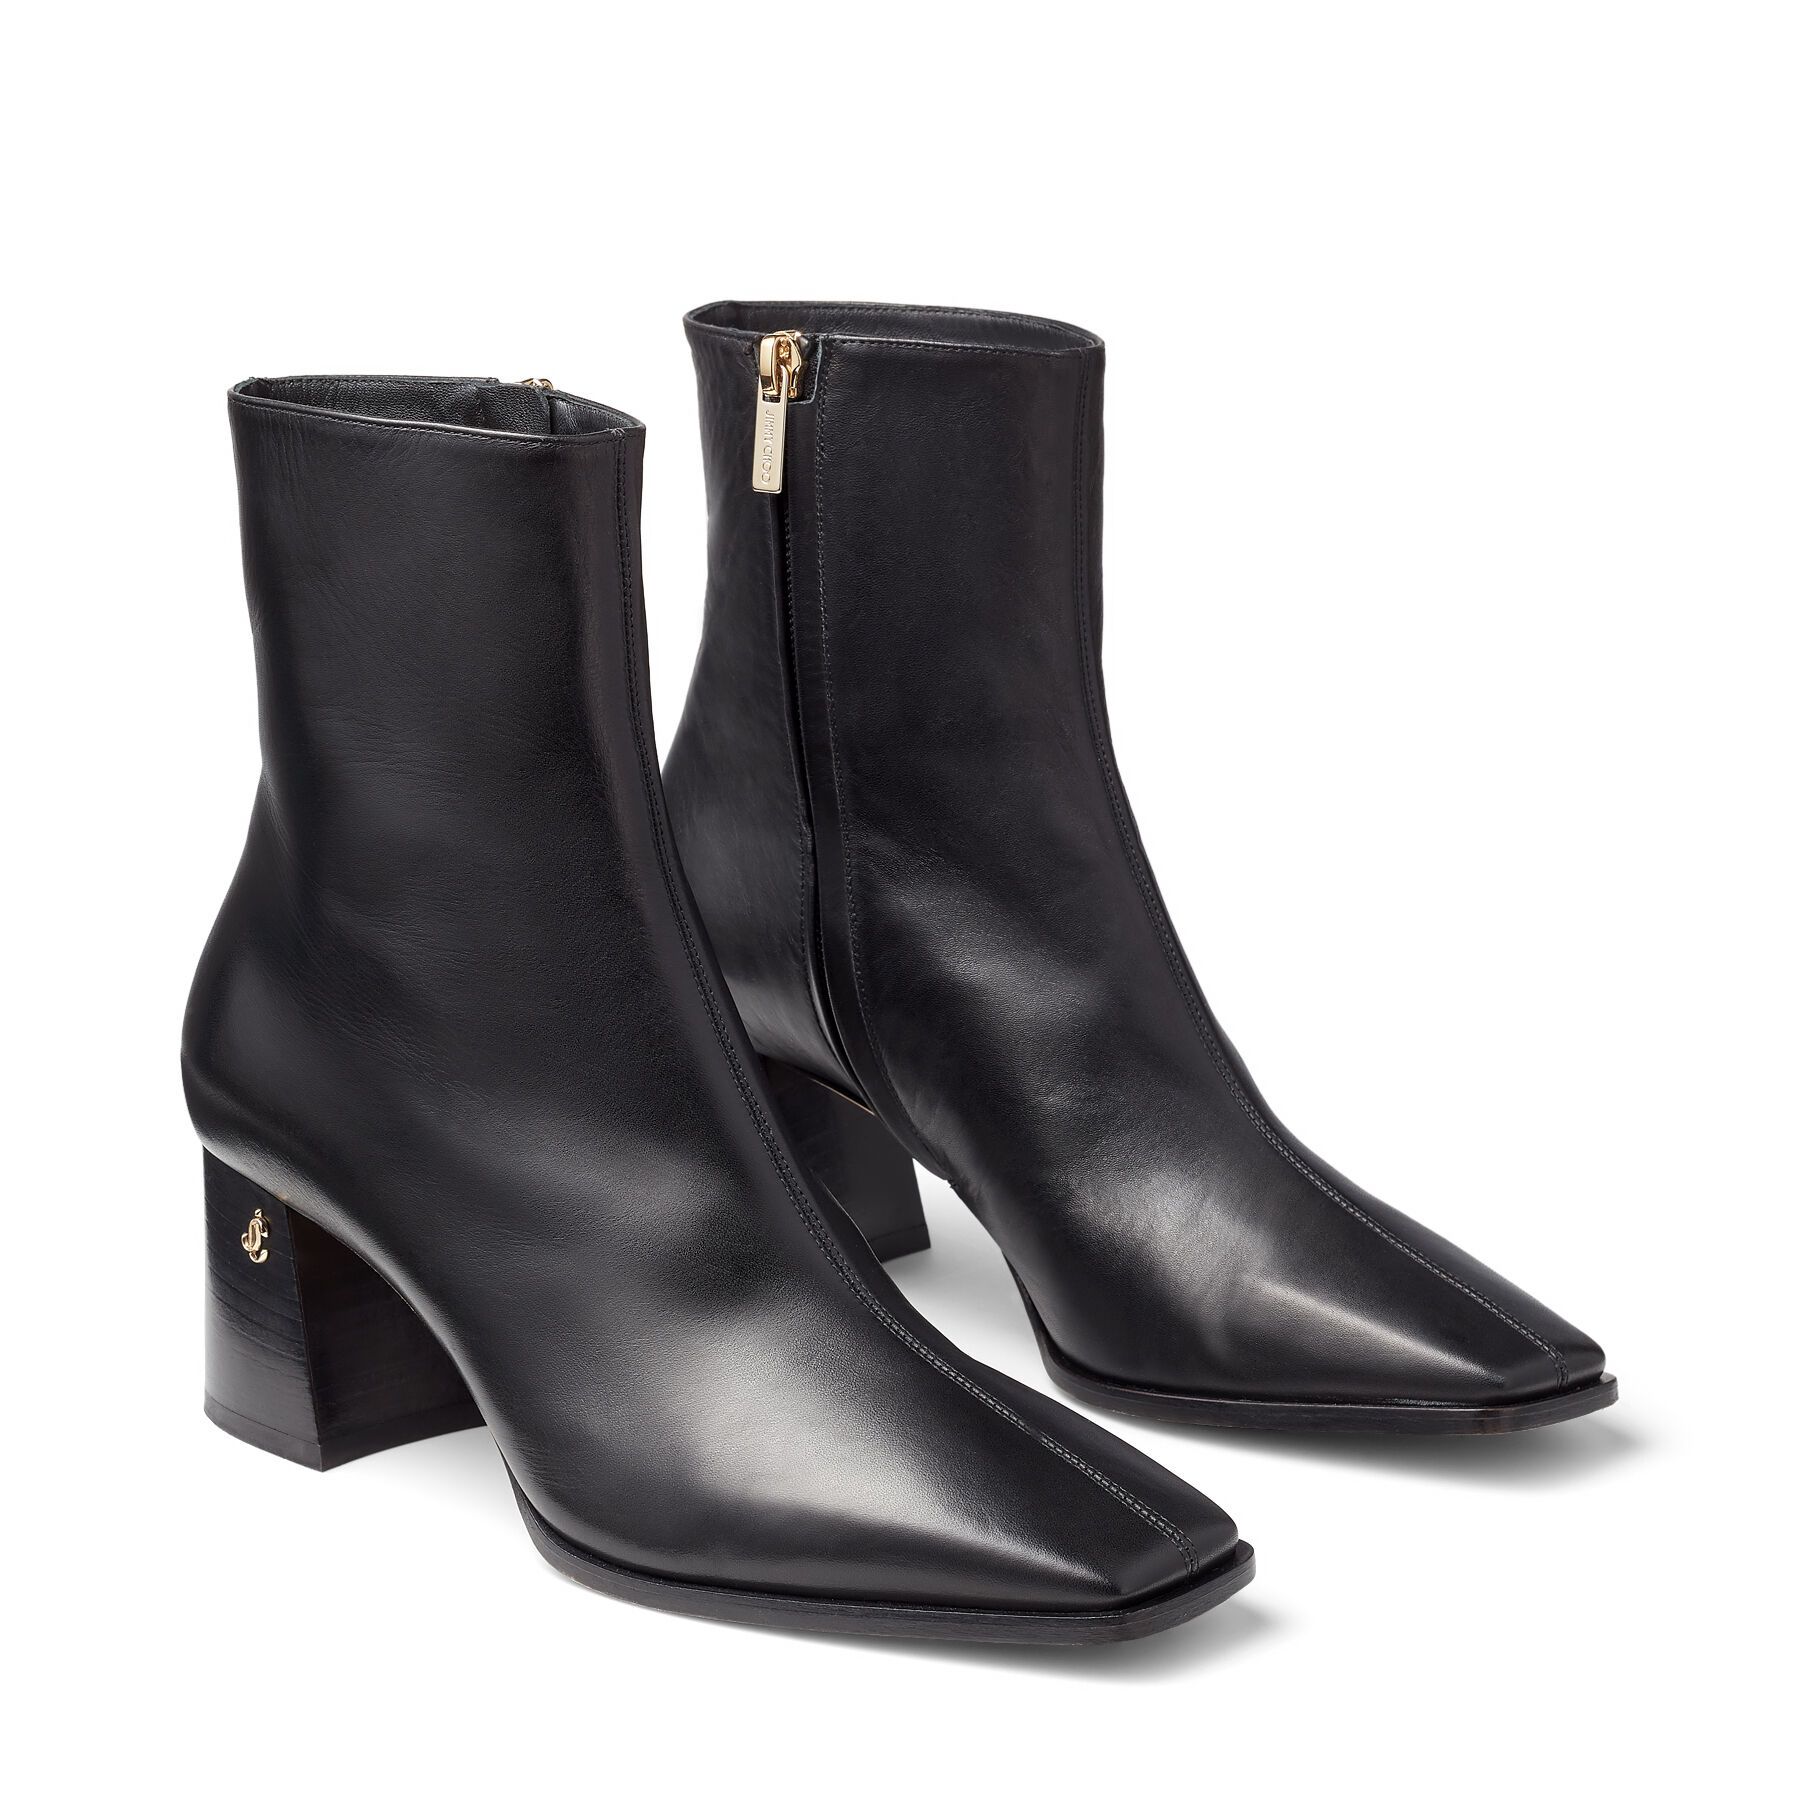 Black Calf Leather Block Heel Ankle Boots with JC emblem |BRYELLE 65 ...